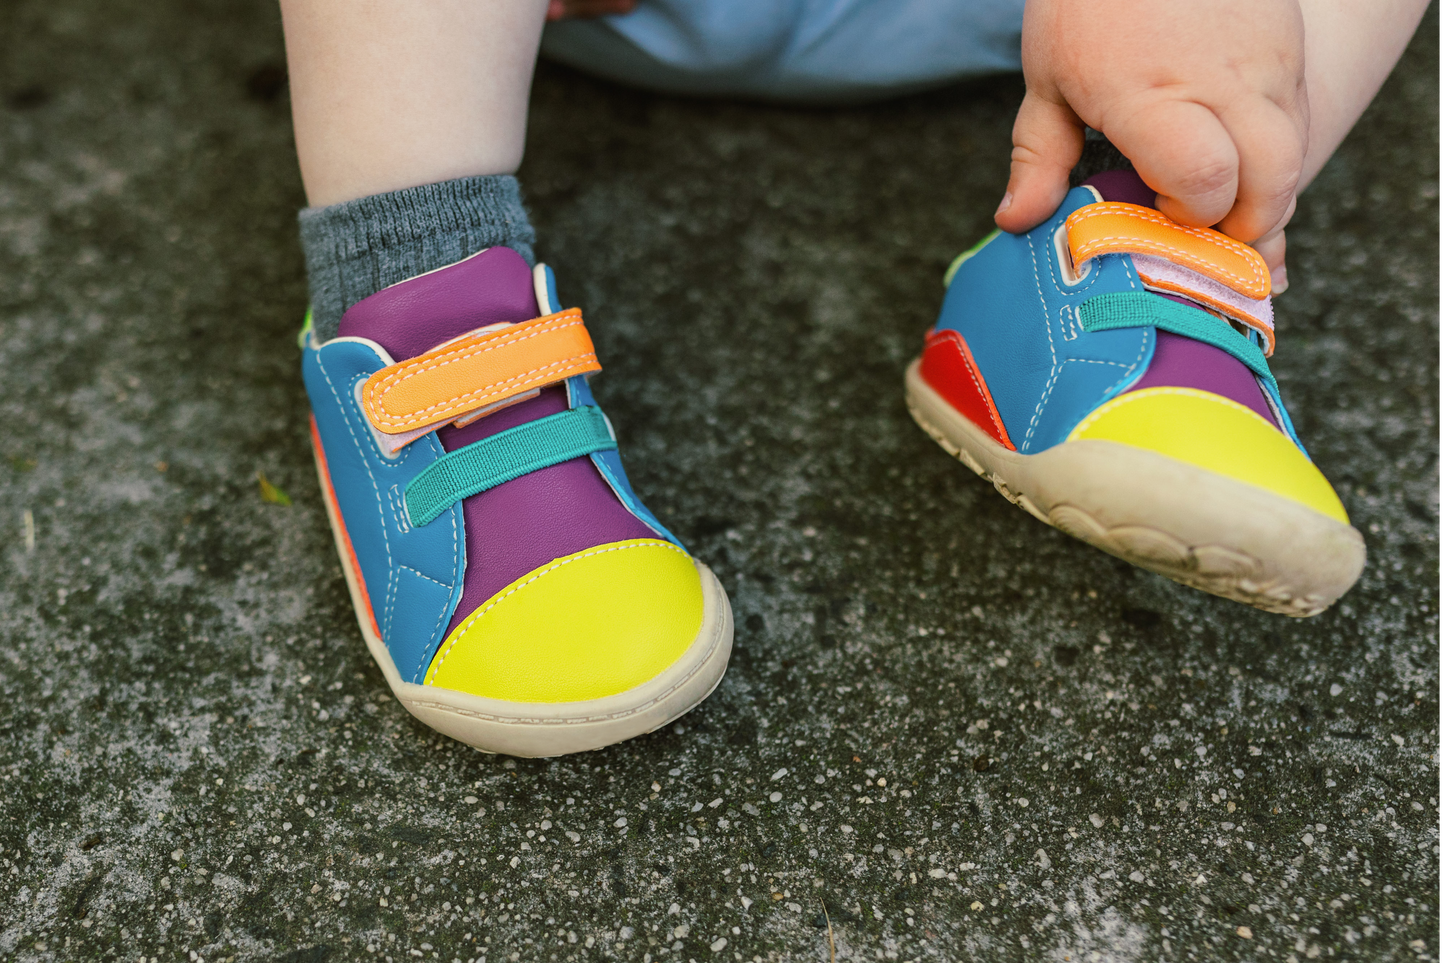 A TODDLER IN VEGGIE MIDI SNEAKERS, THEY HAVE BRIGHT YELLOW TOES, PURPLE TONGUE, ORANGE AND TEAL STRAPS, BLUE SIDES, AND BEIGE SOLES